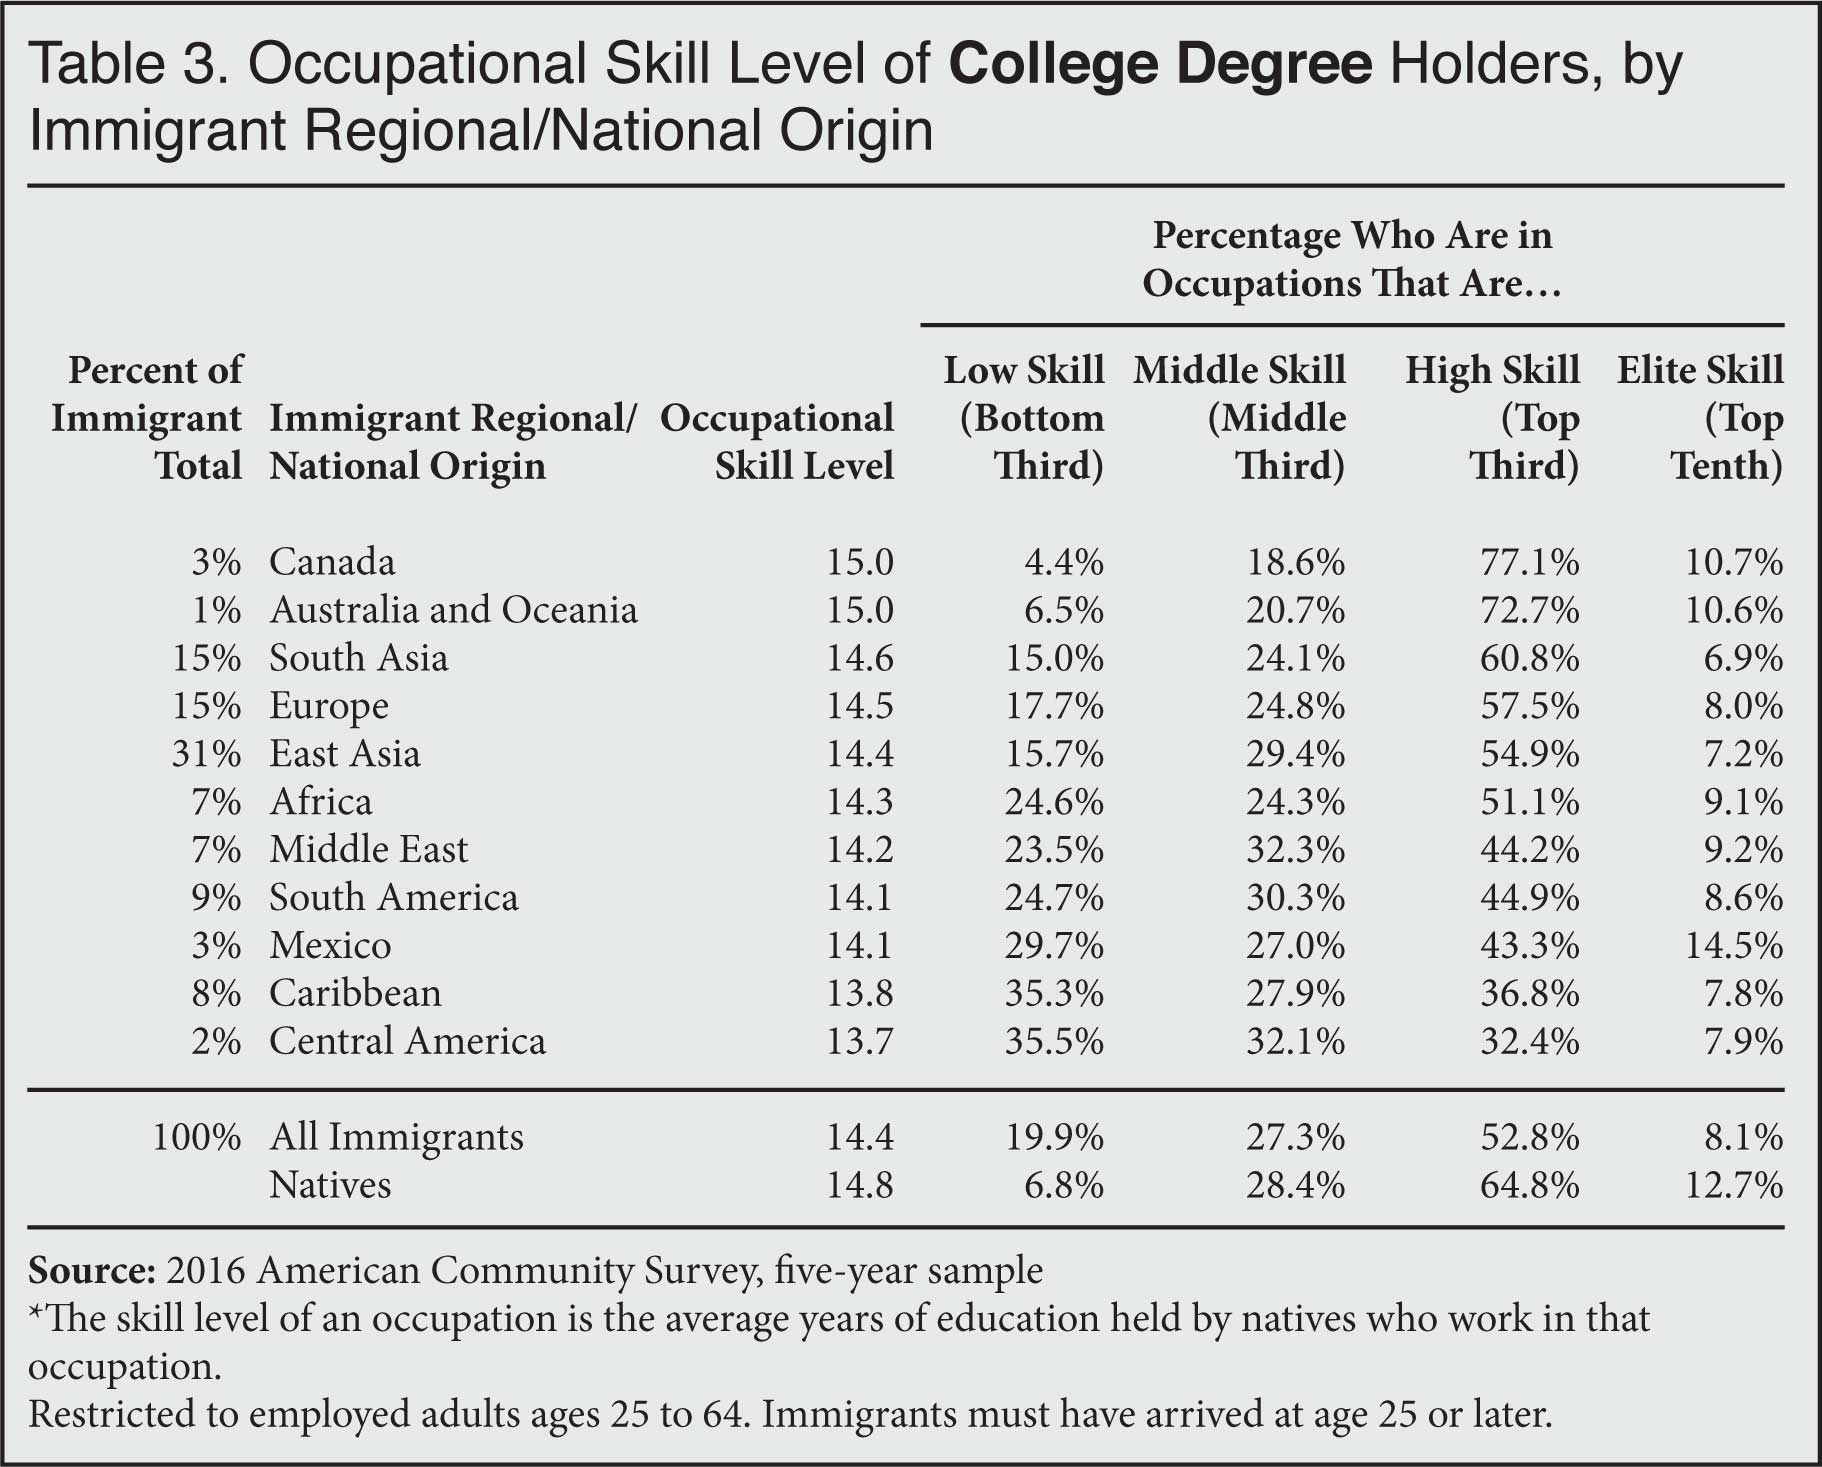 Table: Occupational Skill Level of College Degree Holders, by Immigrant Regional/National Origin